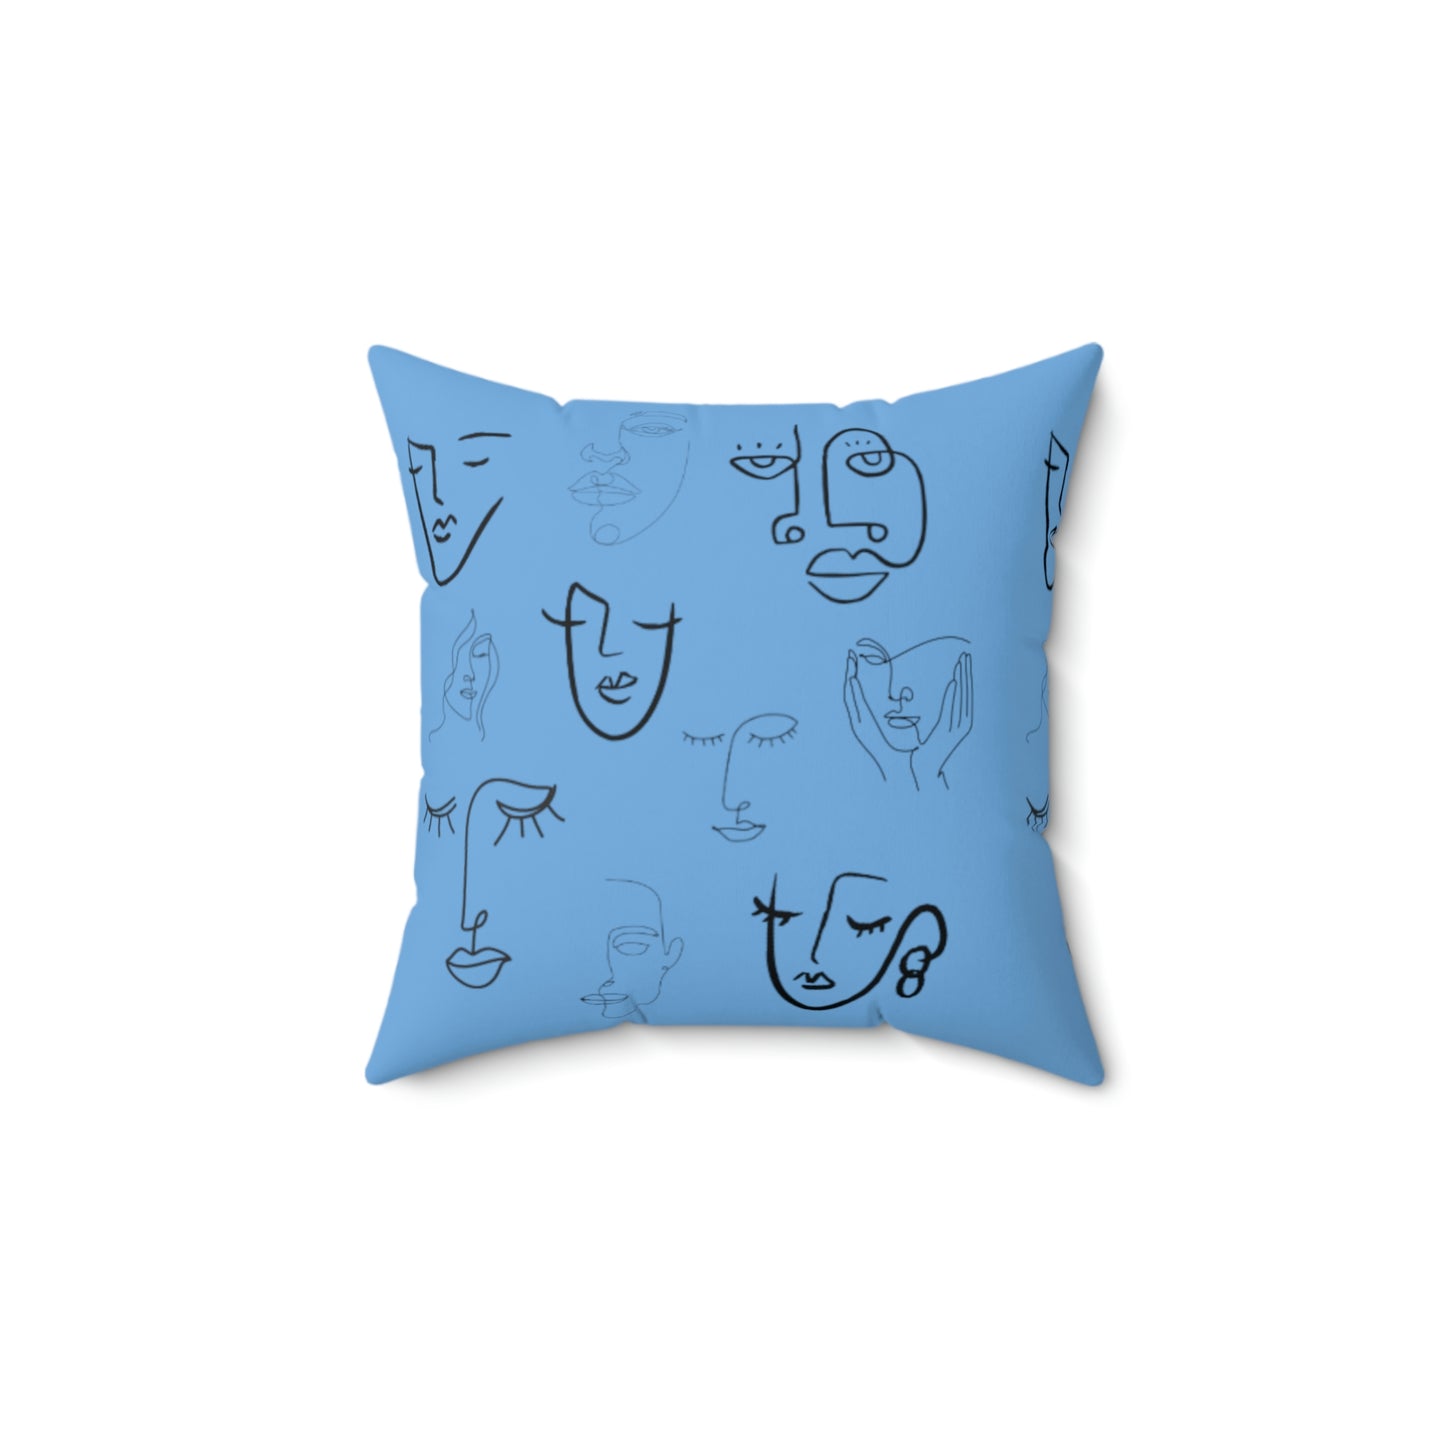 Many Faces blue - Spun Polyester Square Pillow